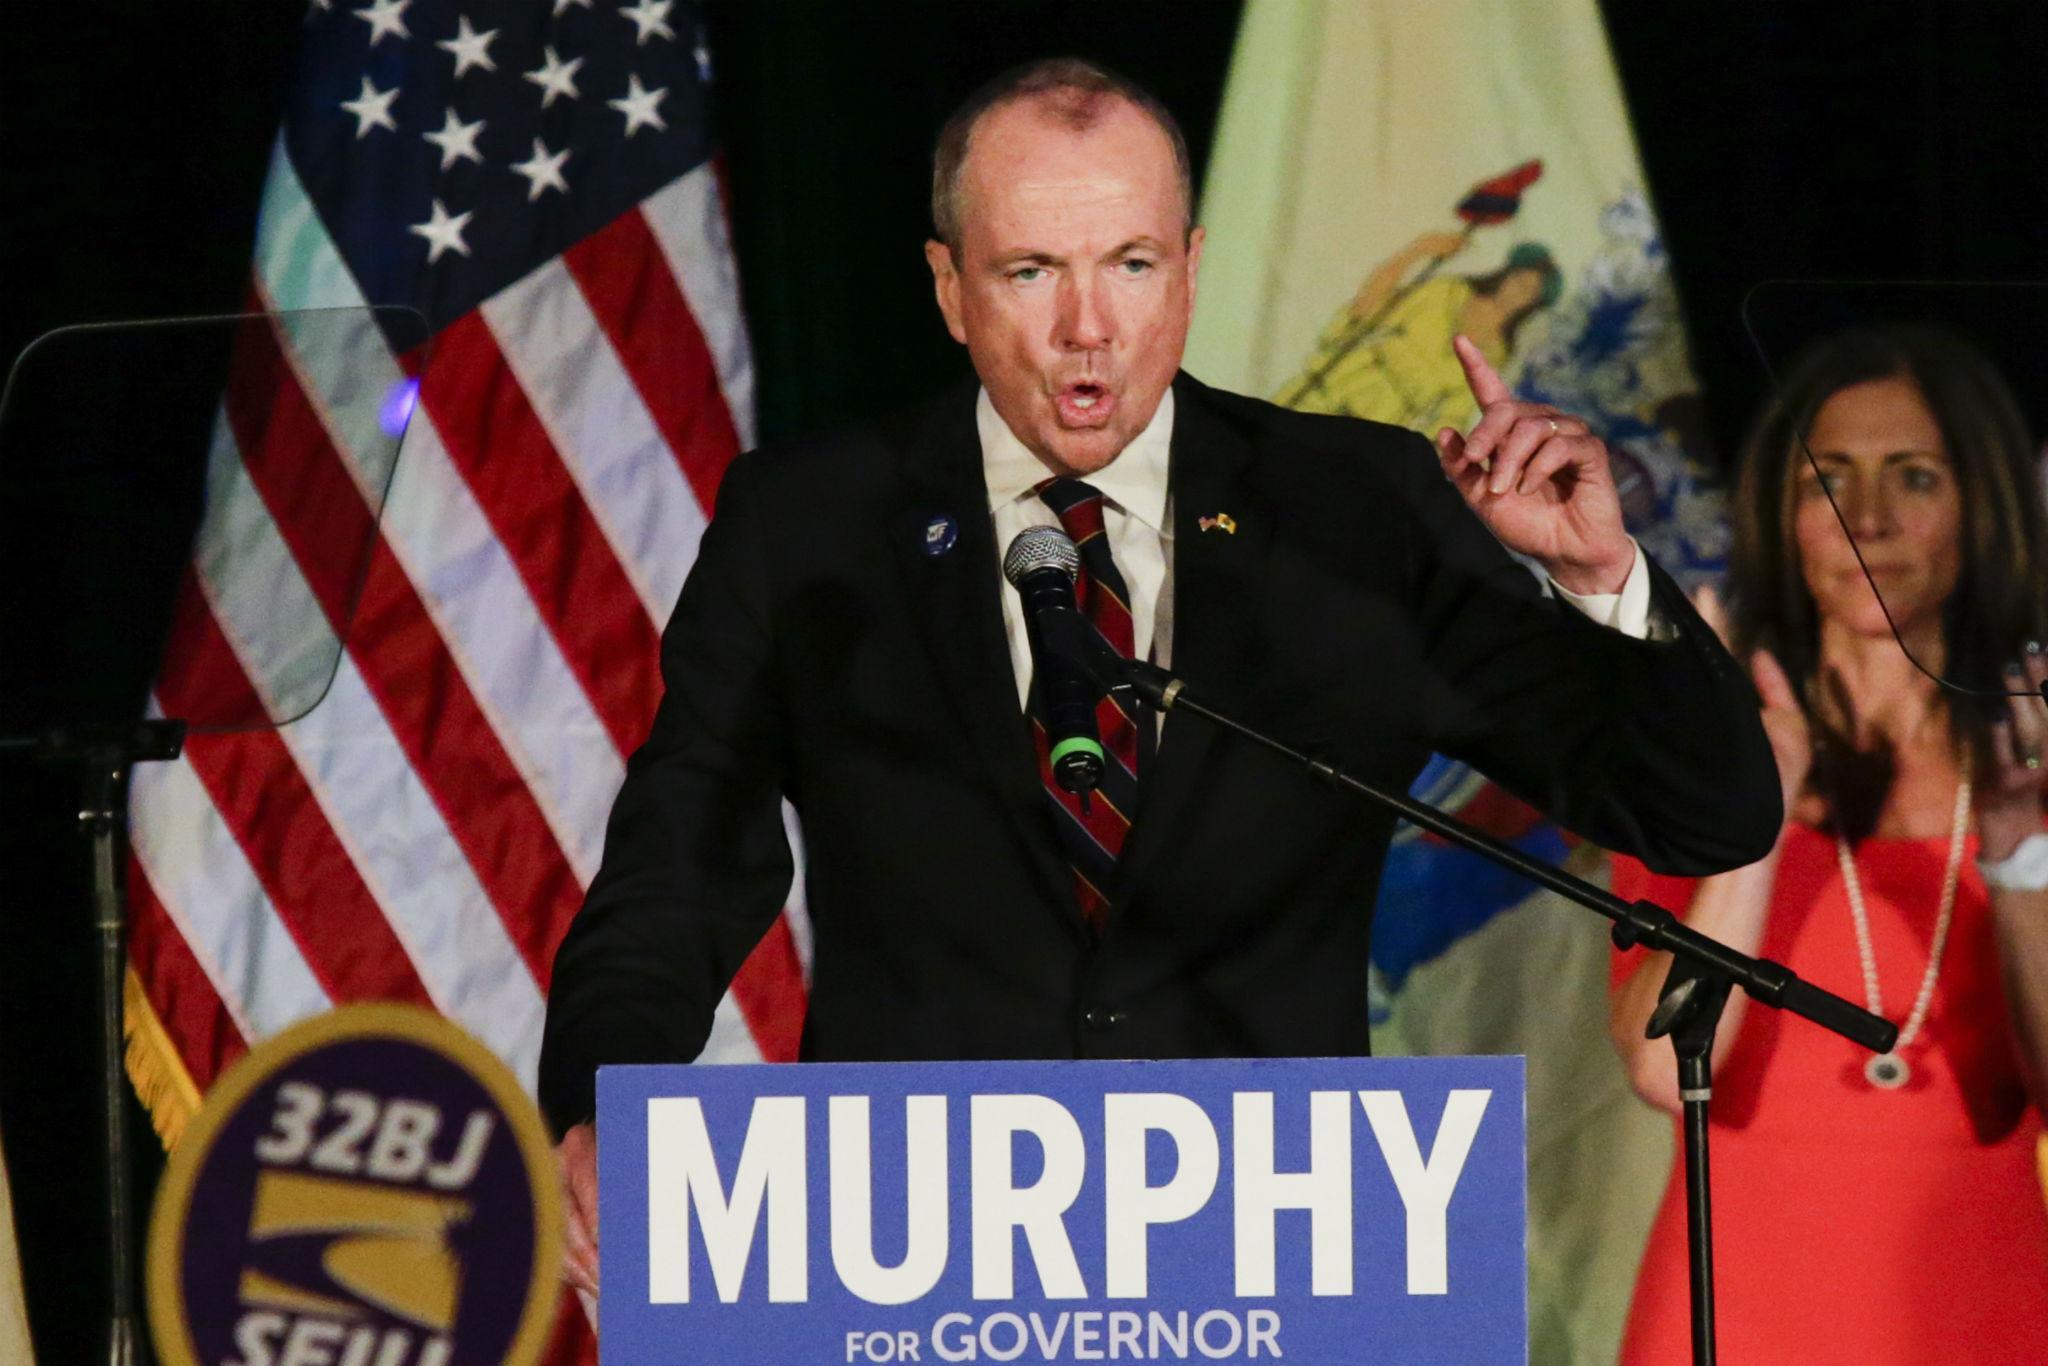 New Jersey Governor Phil Murphy campaigned on the need for major new gun regulations